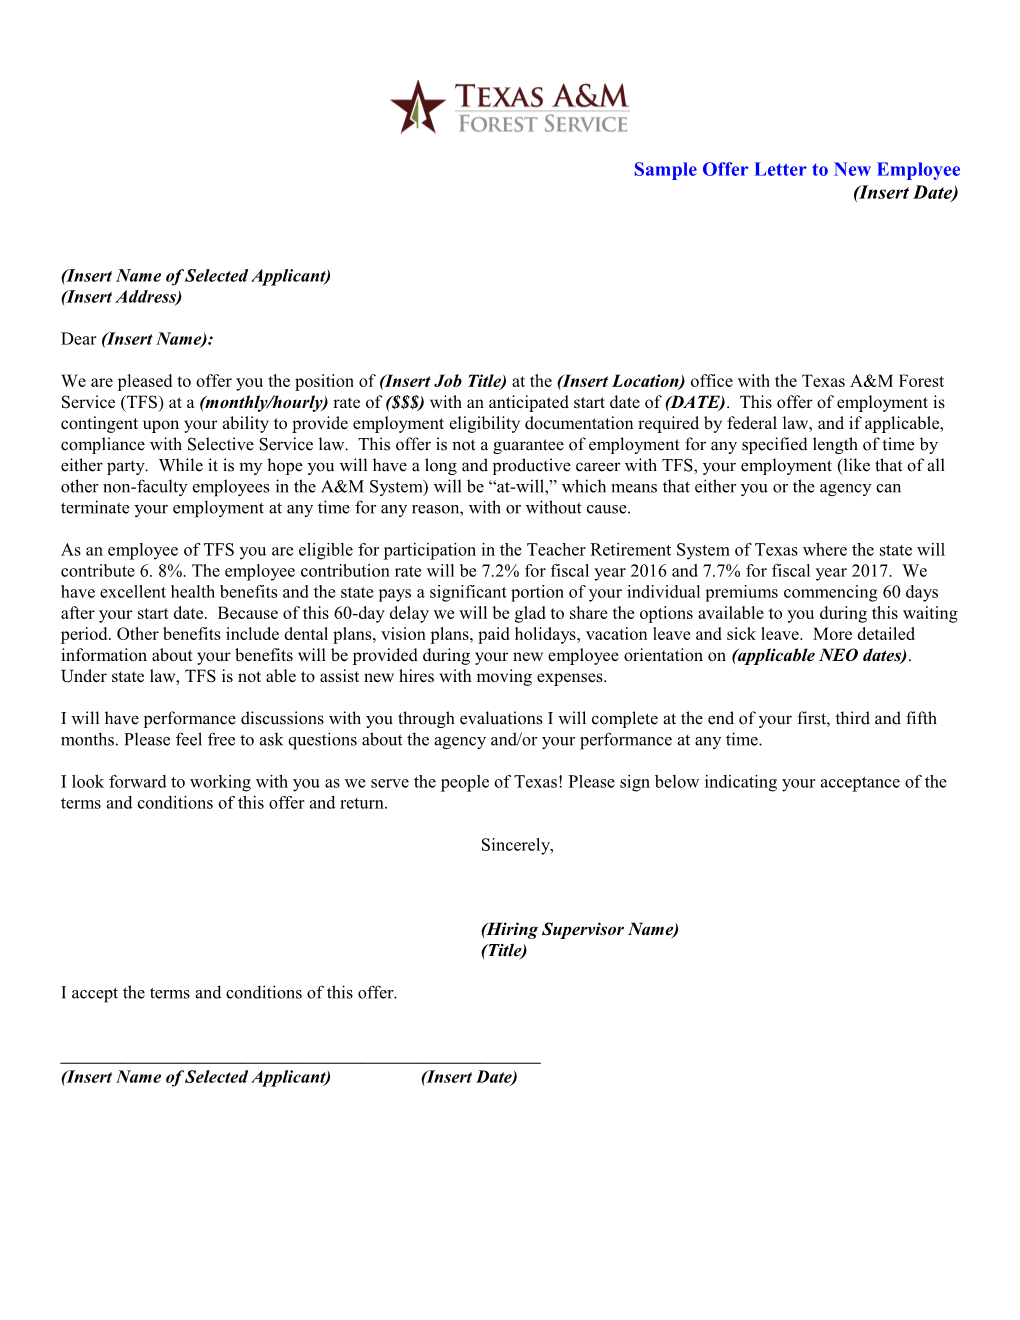 Sample Offer Letter to New Employee